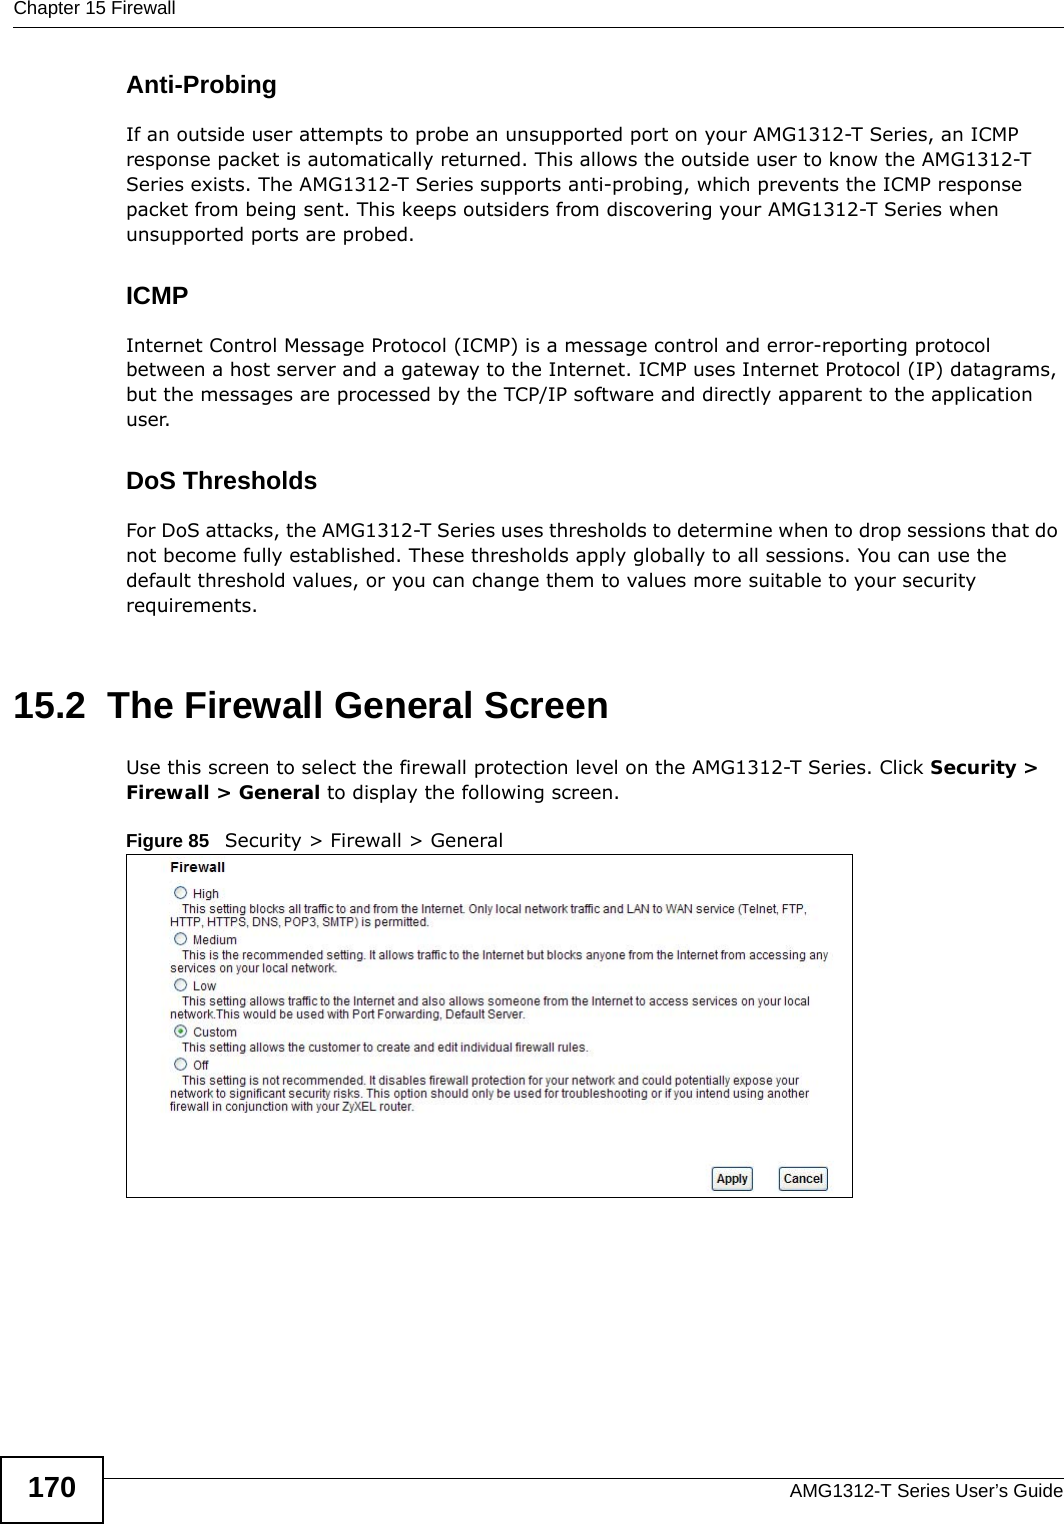 Chapter 15 FirewallAMG1312-T Series User’s Guide170Anti-ProbingIf an outside user attempts to probe an unsupported port on your AMG1312-T Series, an ICMP response packet is automatically returned. This allows the outside user to know the AMG1312-T Series exists. The AMG1312-T Series supports anti-probing, which prevents the ICMP response packet from being sent. This keeps outsiders from discovering your AMG1312-T Series when unsupported ports are probed. ICMPInternet Control Message Protocol (ICMP) is a message control and error-reporting protocol between a host server and a gateway to the Internet. ICMP uses Internet Protocol (IP) datagrams, but the messages are processed by the TCP/IP software and directly apparent to the application user. DoS ThresholdsFor DoS attacks, the AMG1312-T Series uses thresholds to determine when to drop sessions that do not become fully established. These thresholds apply globally to all sessions. You can use the default threshold values, or you can change them to values more suitable to your security requirements.15.2  The Firewall General ScreenUse this screen to select the firewall protection level on the AMG1312-T Series. Click Security &gt; Firewall &gt; General to display the following screen.Figure 85   Security &gt; Firewall &gt; General